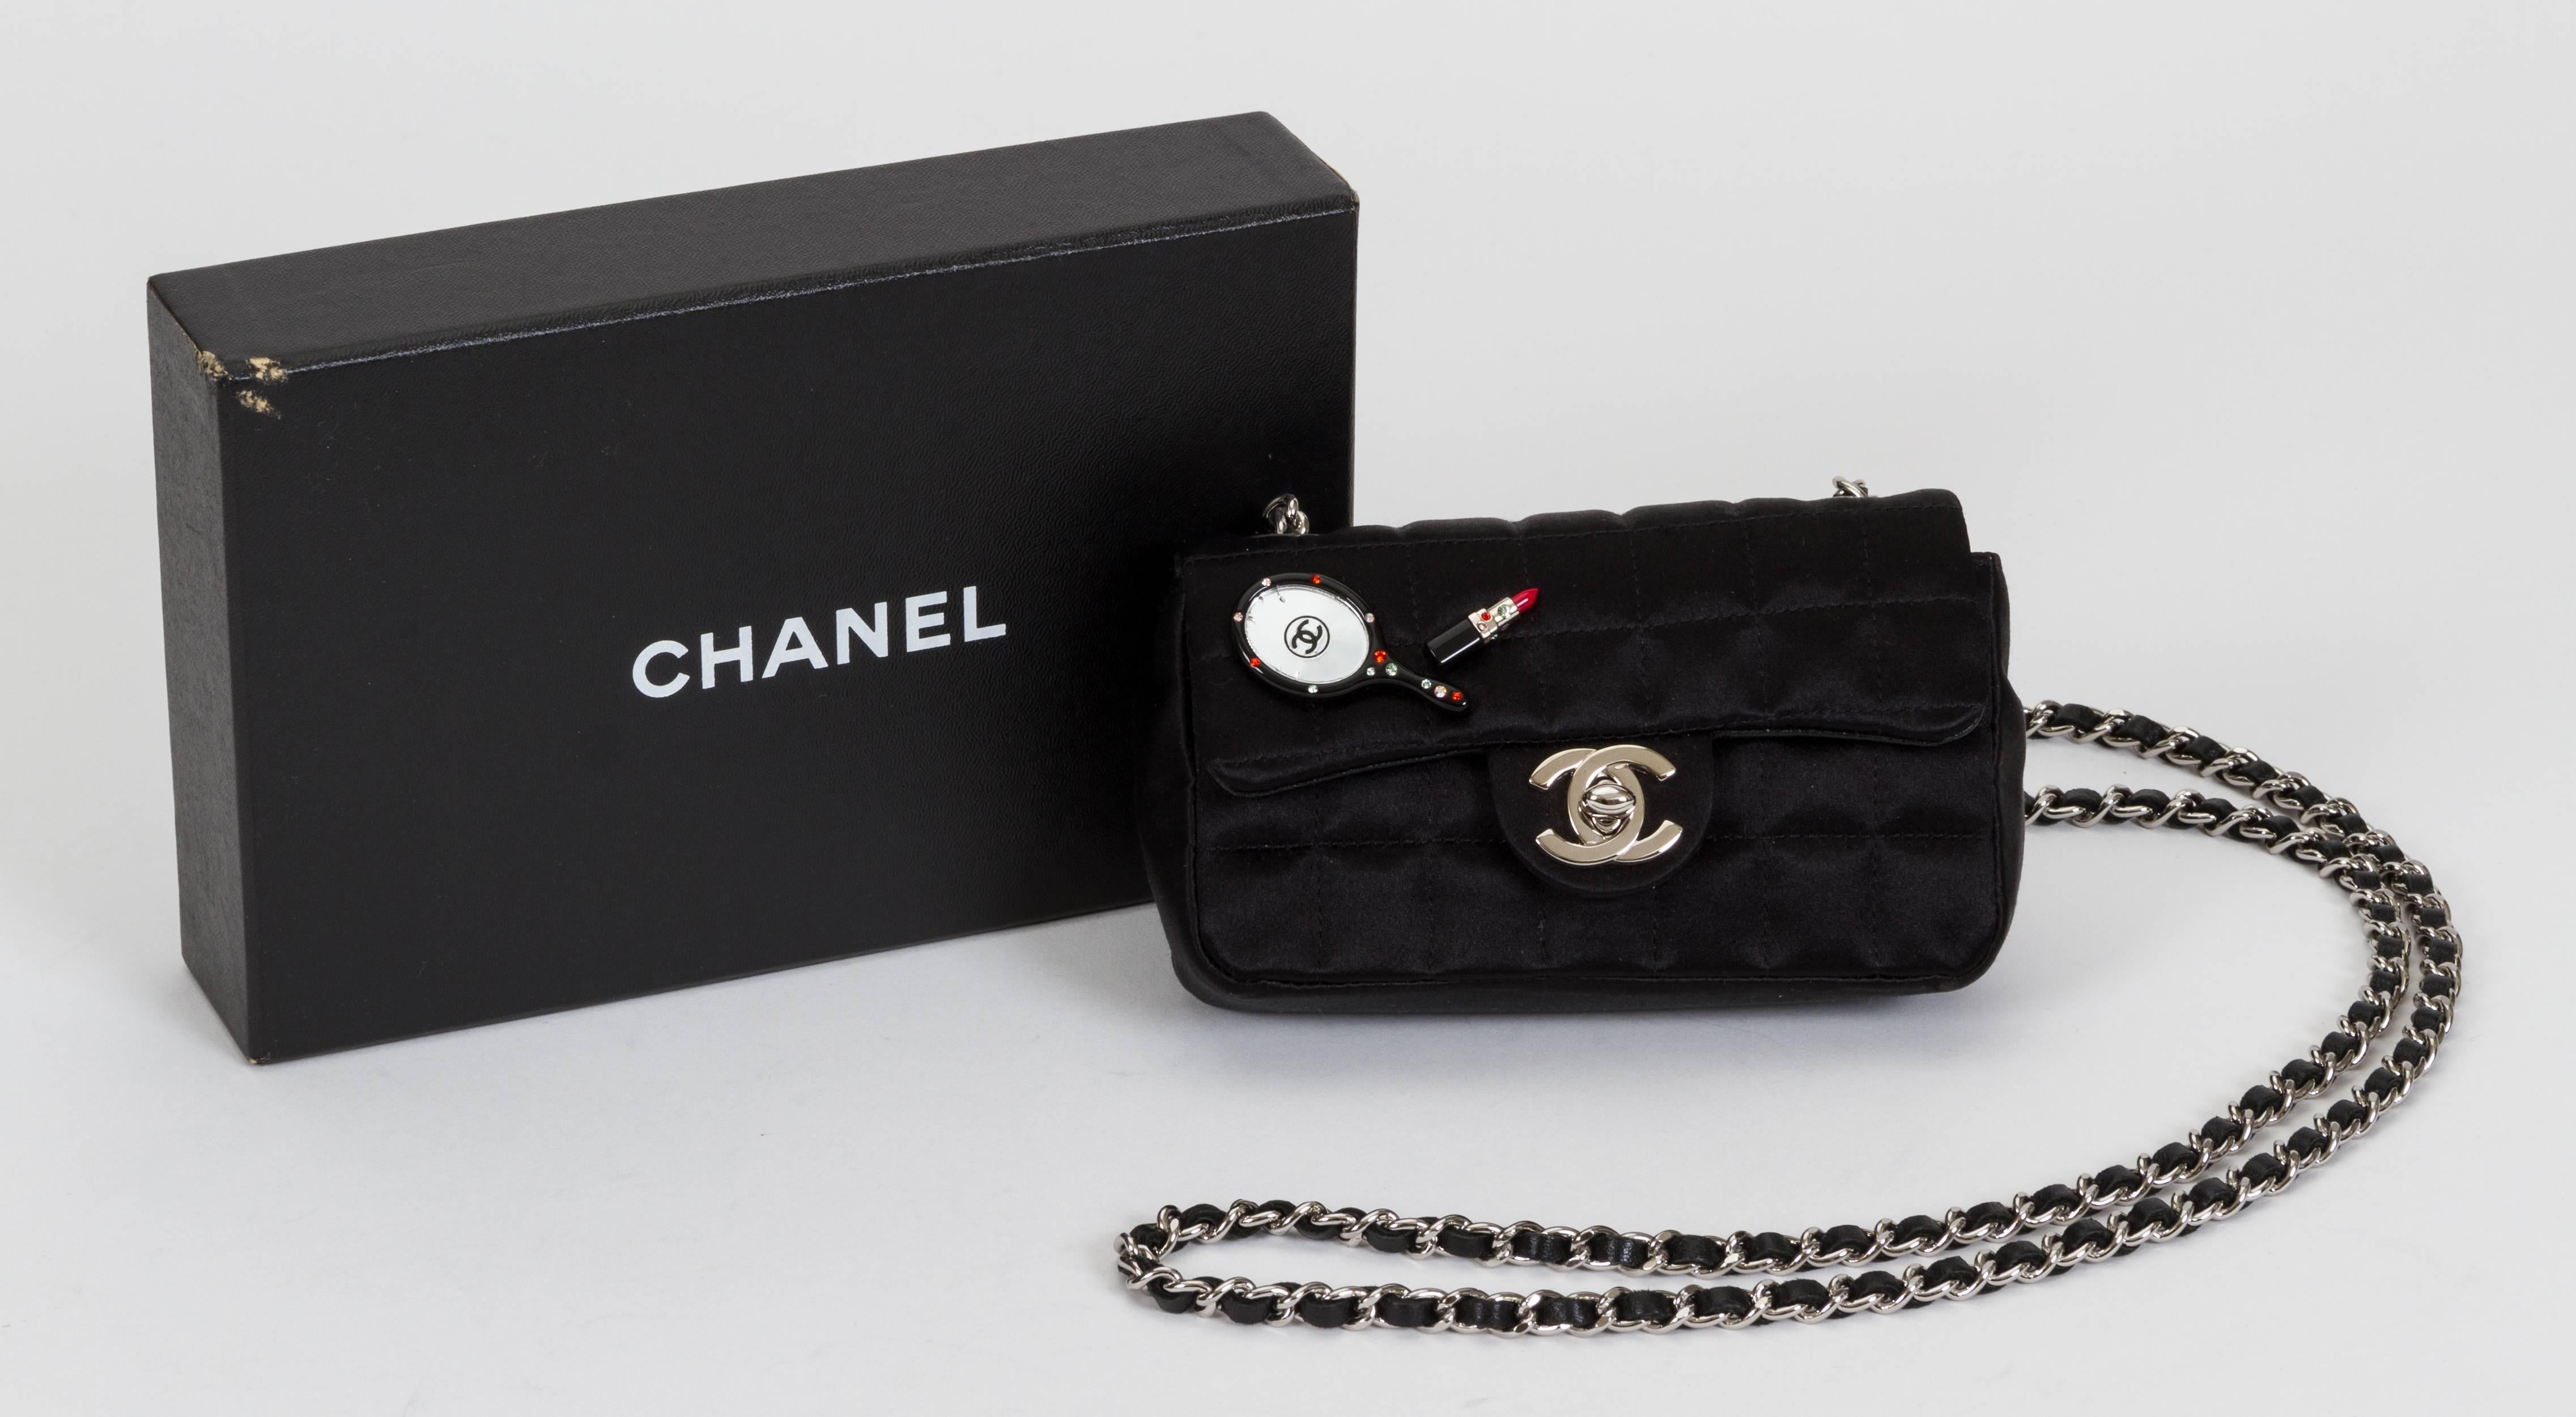 Chanel limited edition make up mini classic flap bag. Few small cracks in the mirror charm. Can be worn cross-body; shoulder drop, 23